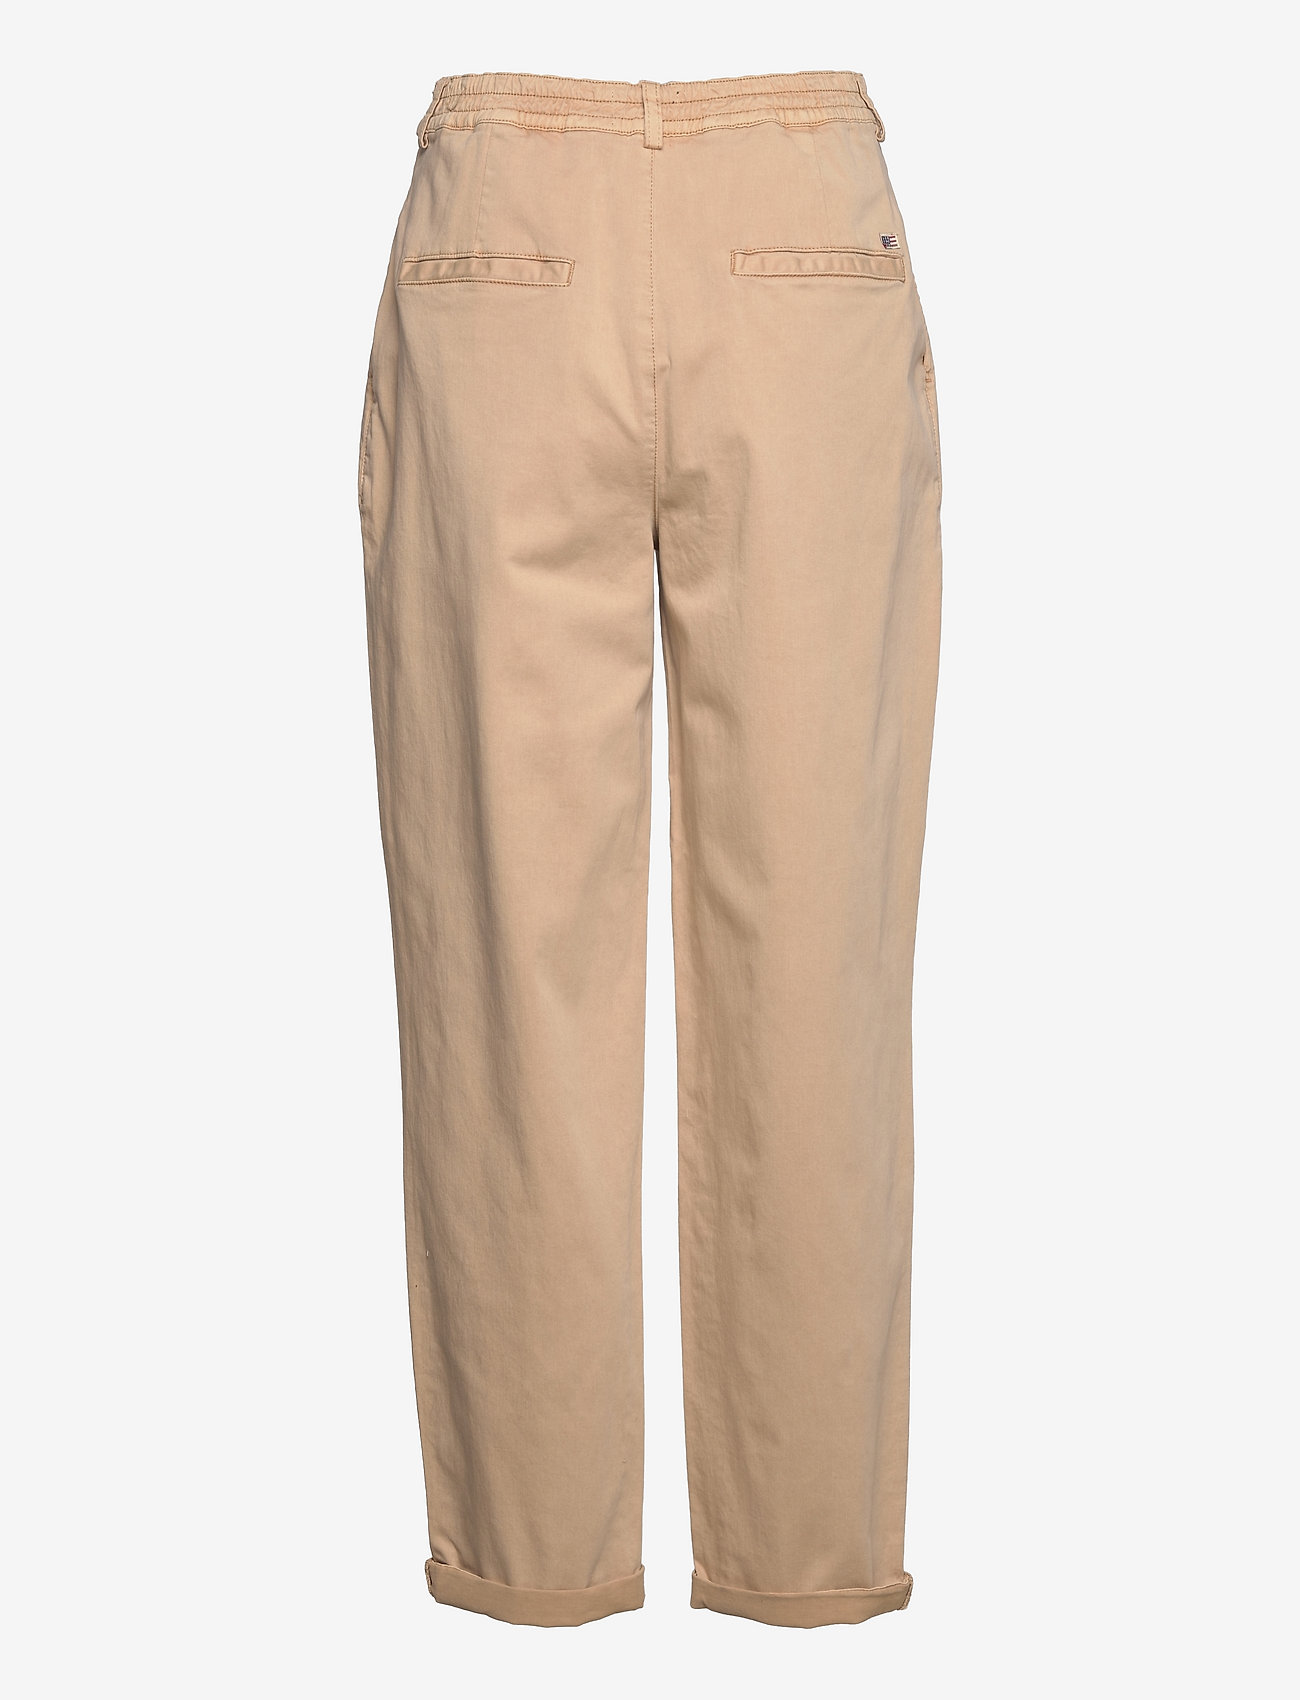 Lexington Clothing - Lilly Cotton/Modal Tapered Pants - beige - 1